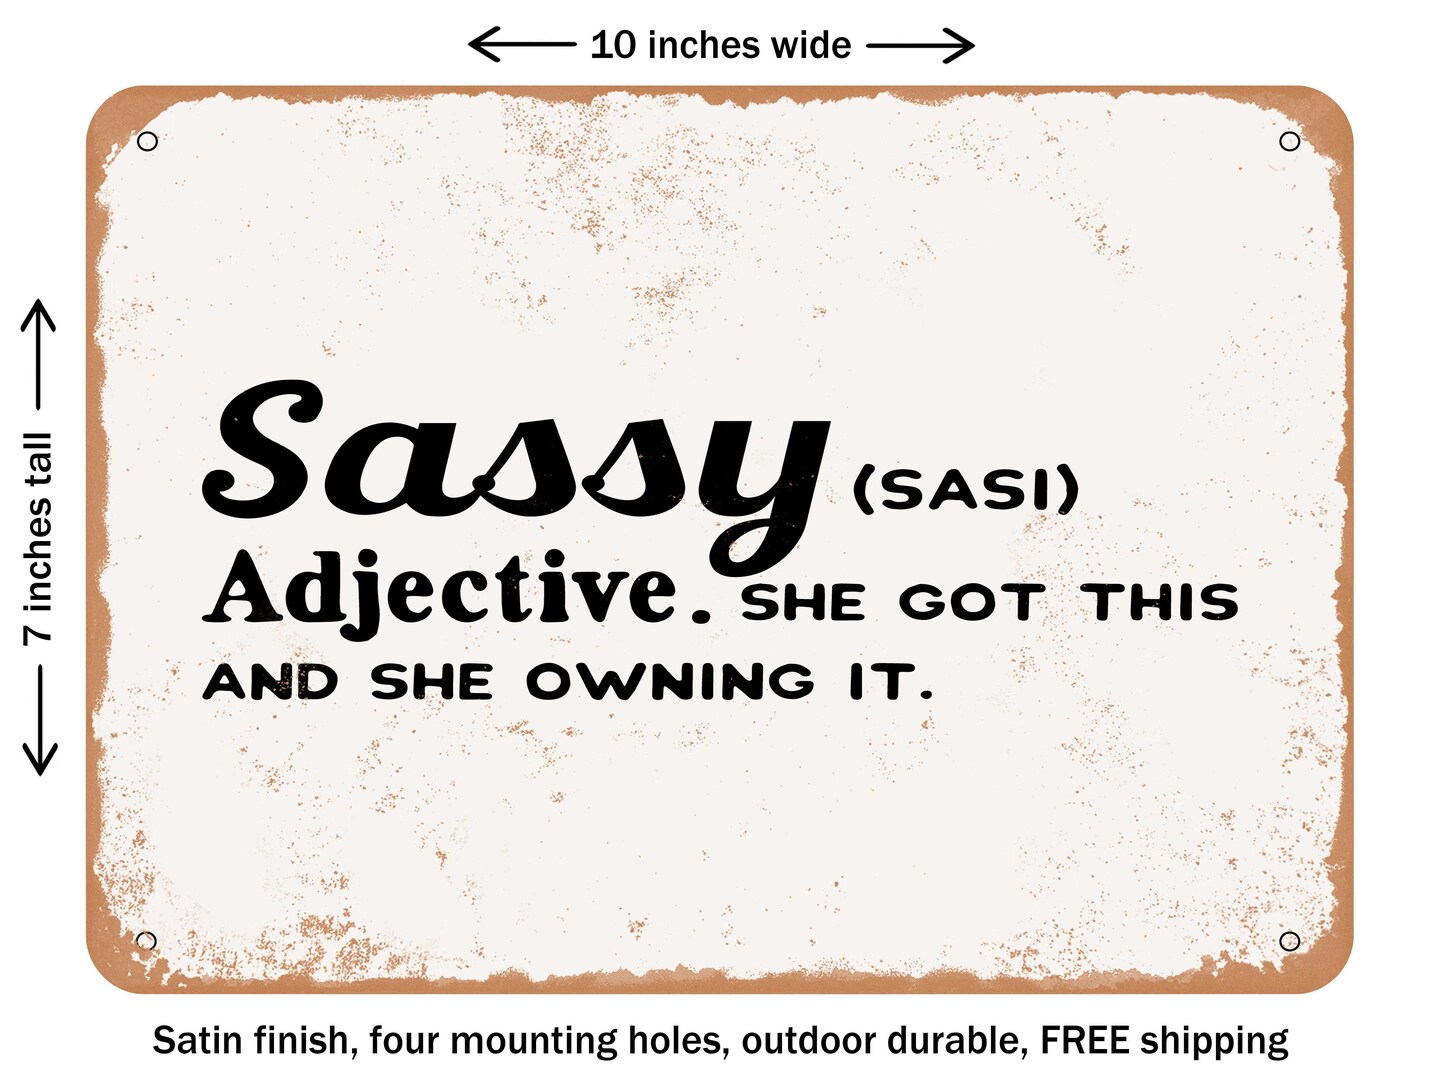 DECORATIVE METAL SIGN - Sassy She Got This and She Owning It - Vintage Rusty Look